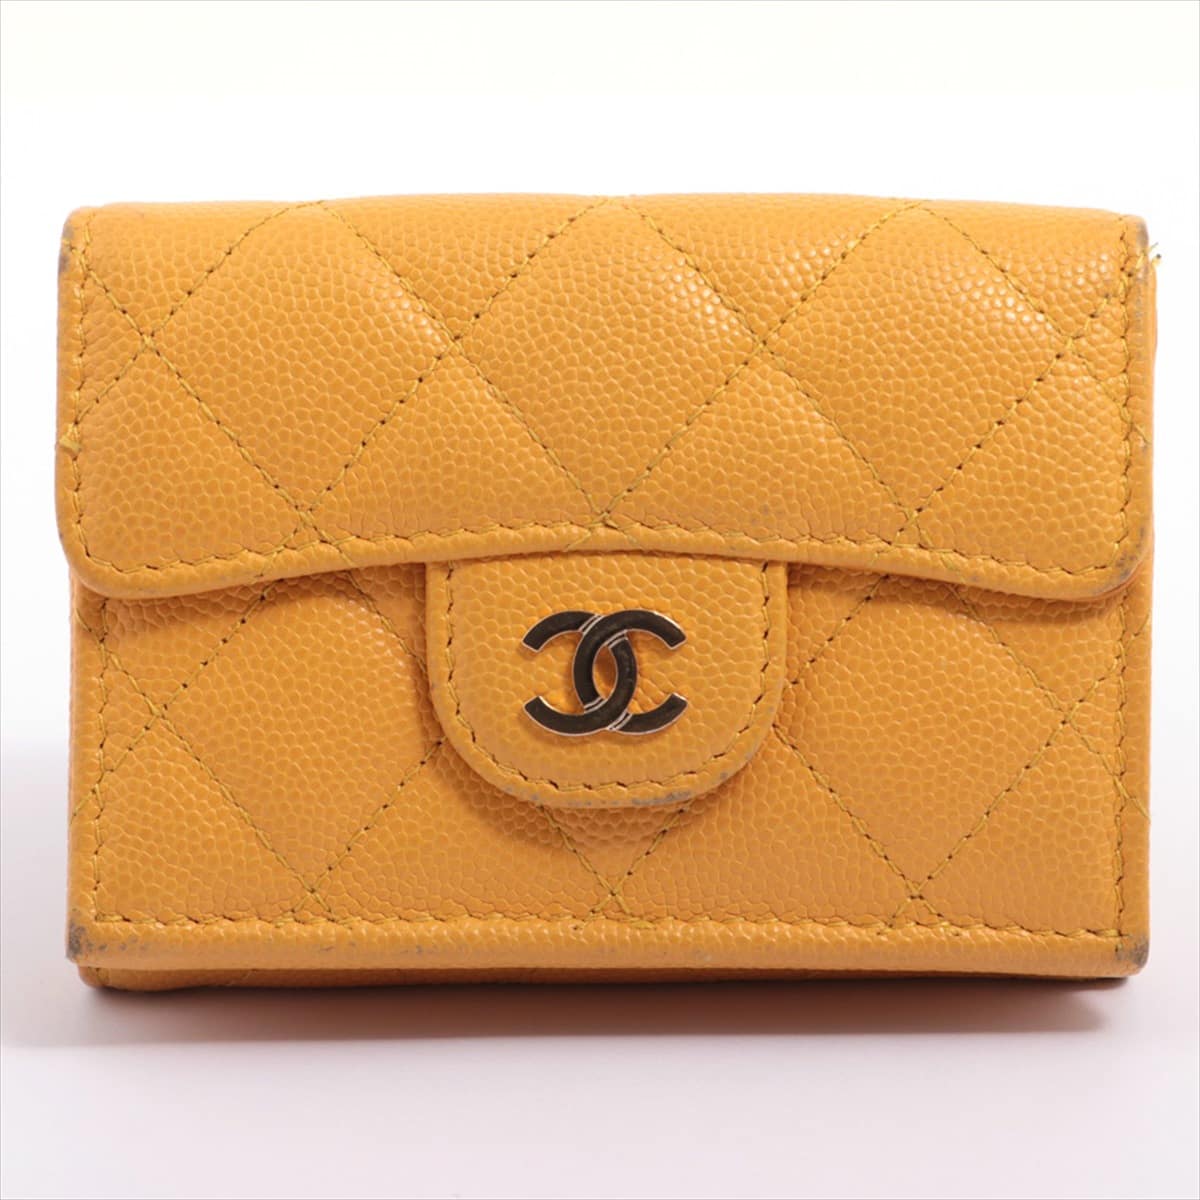 Chanel Matelasse Caviarskin Compact Wallet Yellow Gold Metal fittings 26XXXXXX